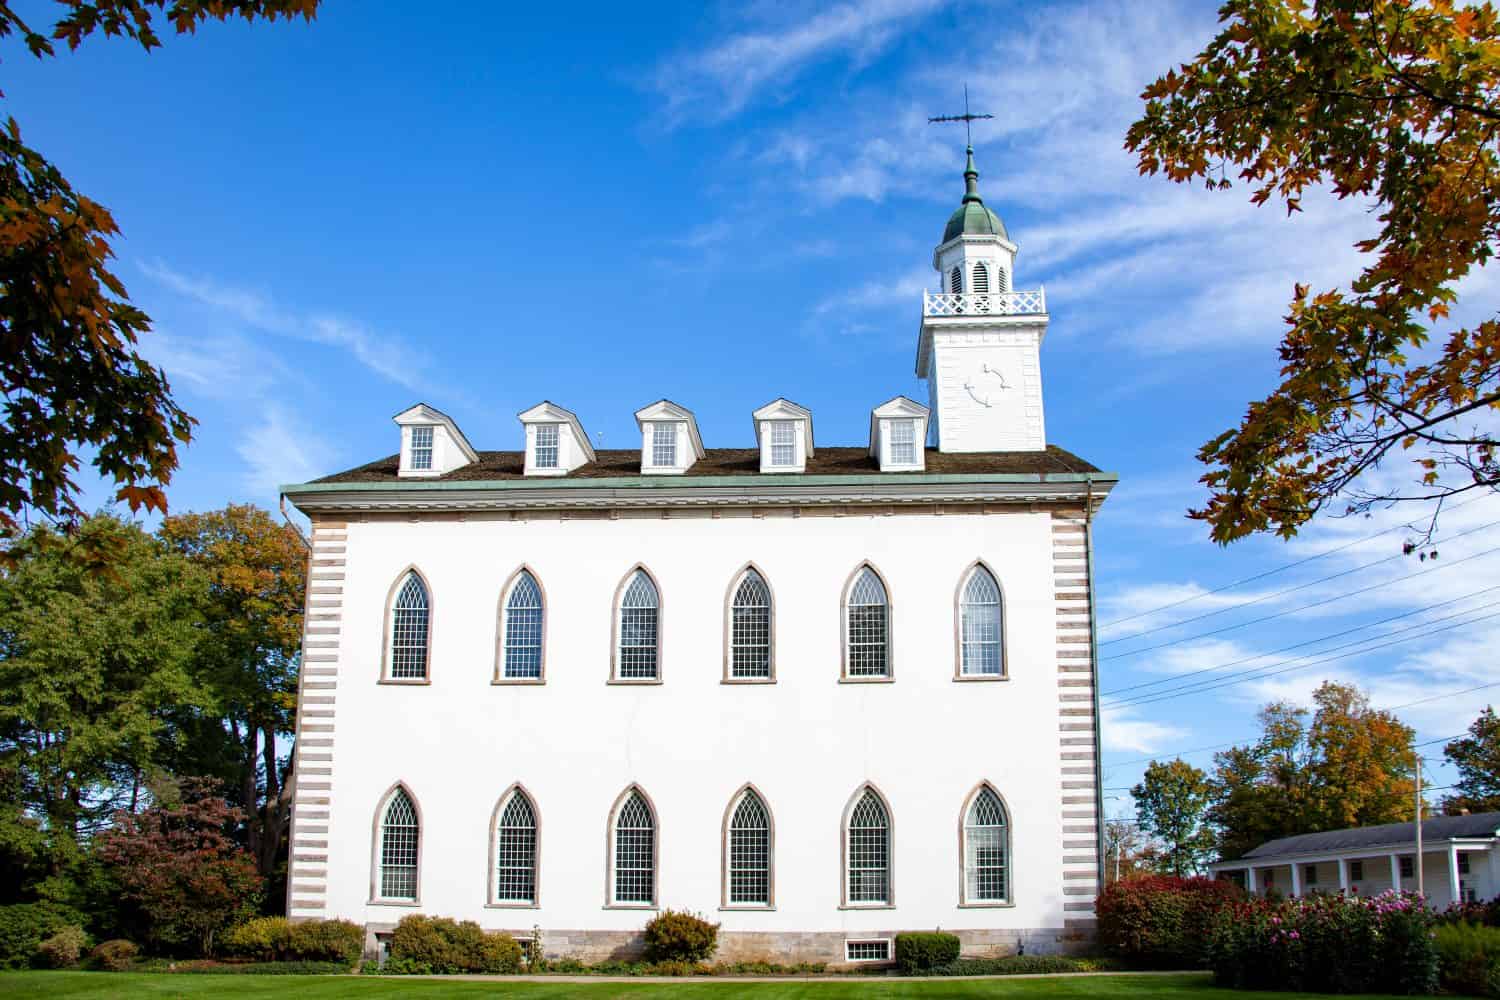 The Kirtland Temple in Kirtland, Ohio stands as a monument to early American Religious ingenuity.  